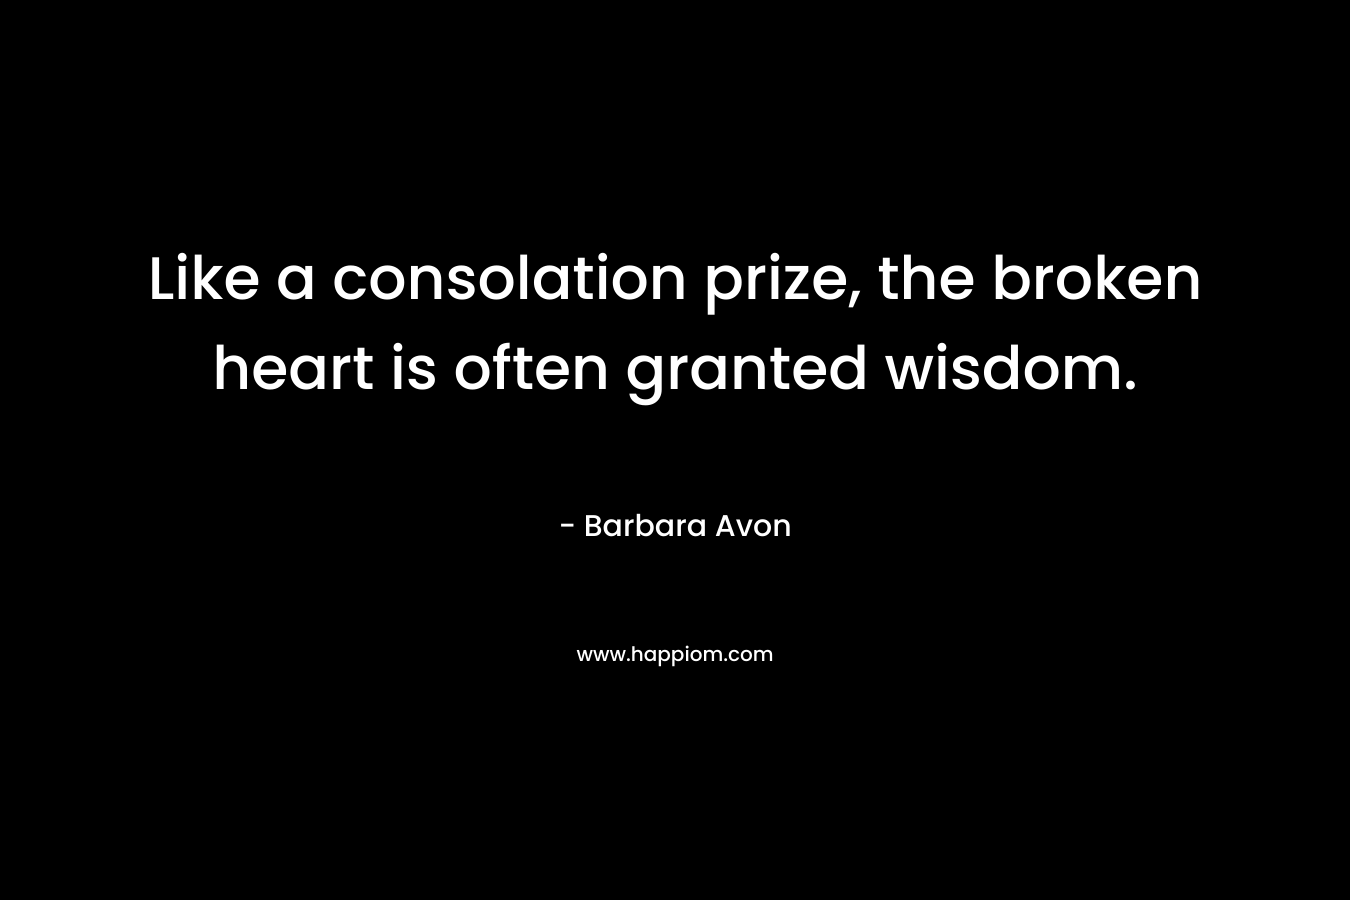 Like a consolation prize, the broken heart is often granted wisdom.